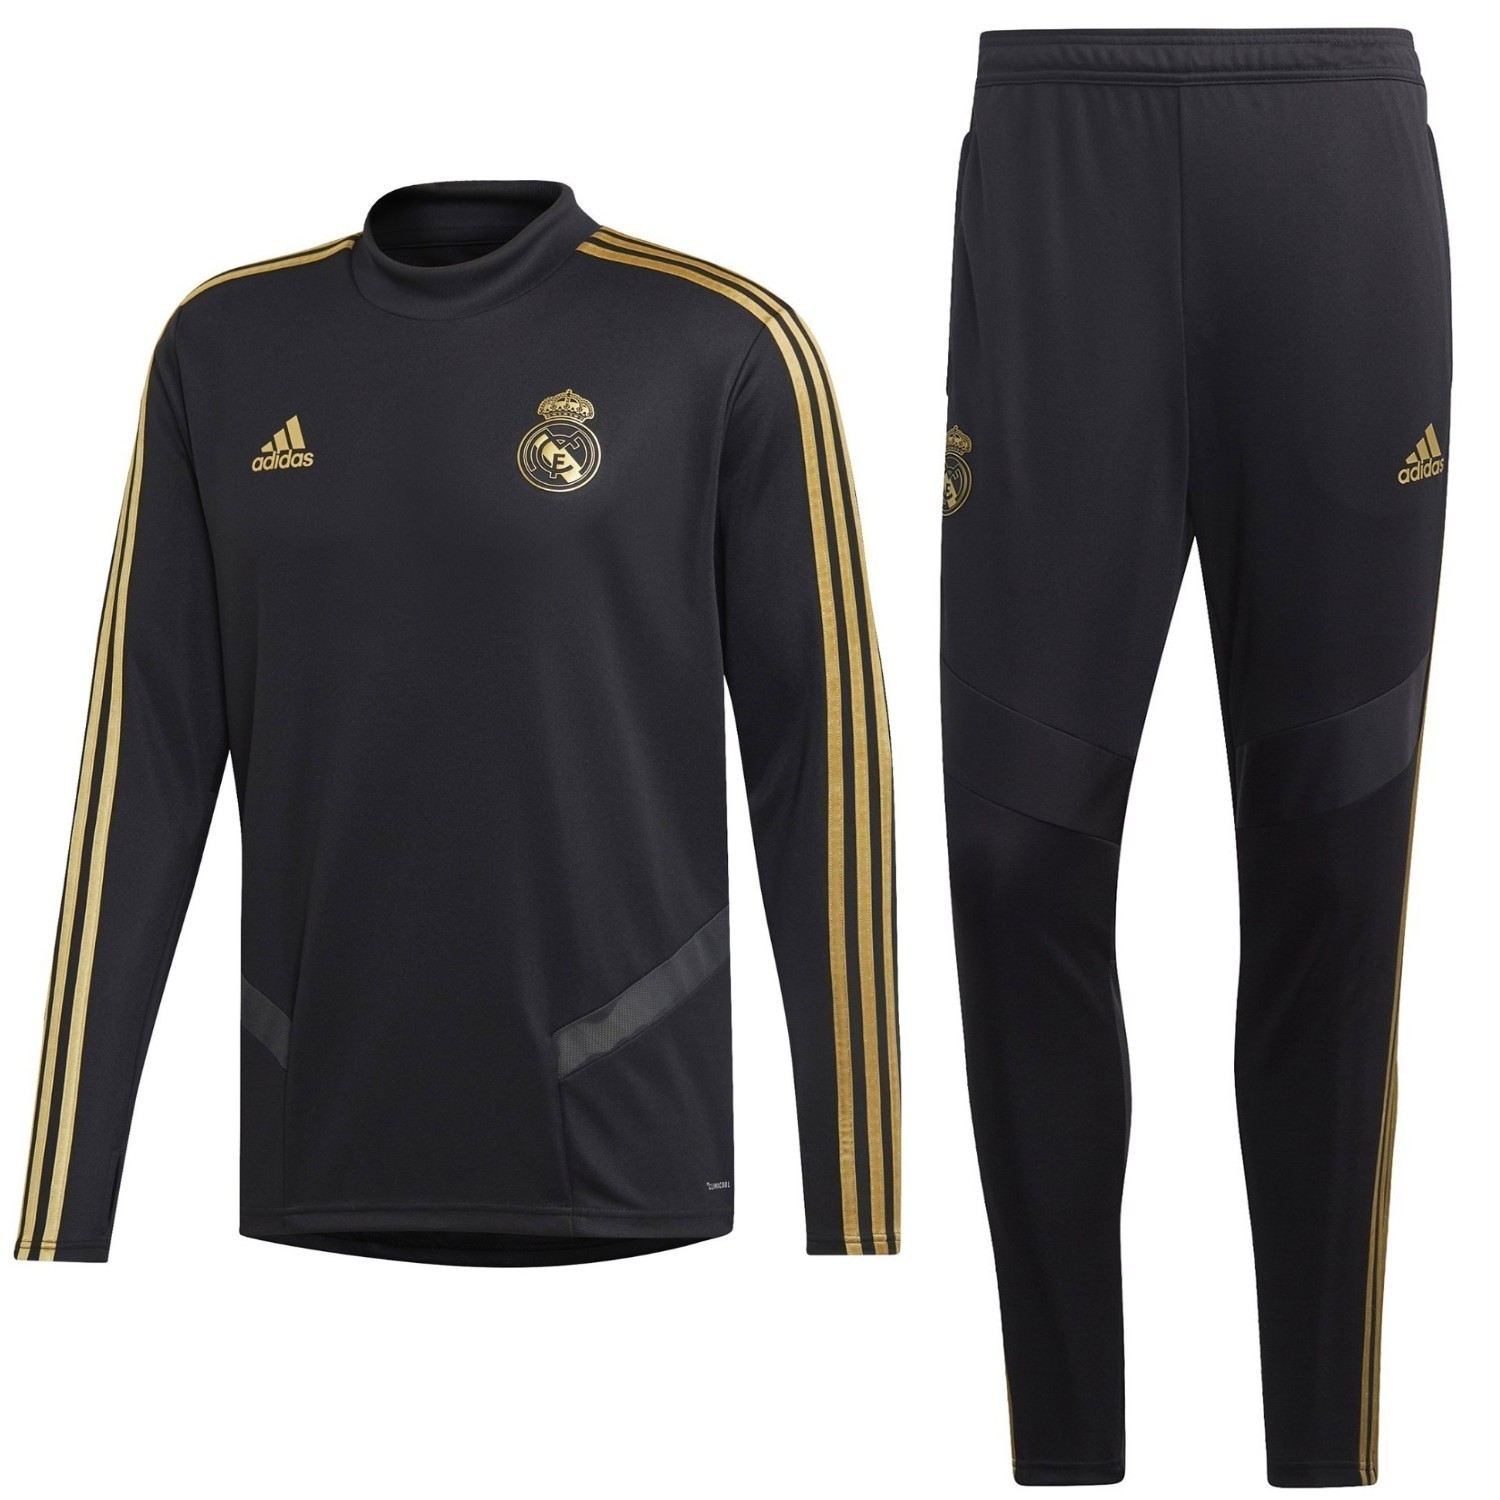 CHANDAL REAL MADRID 2019-20 DX7869 DX7869-NEGRO